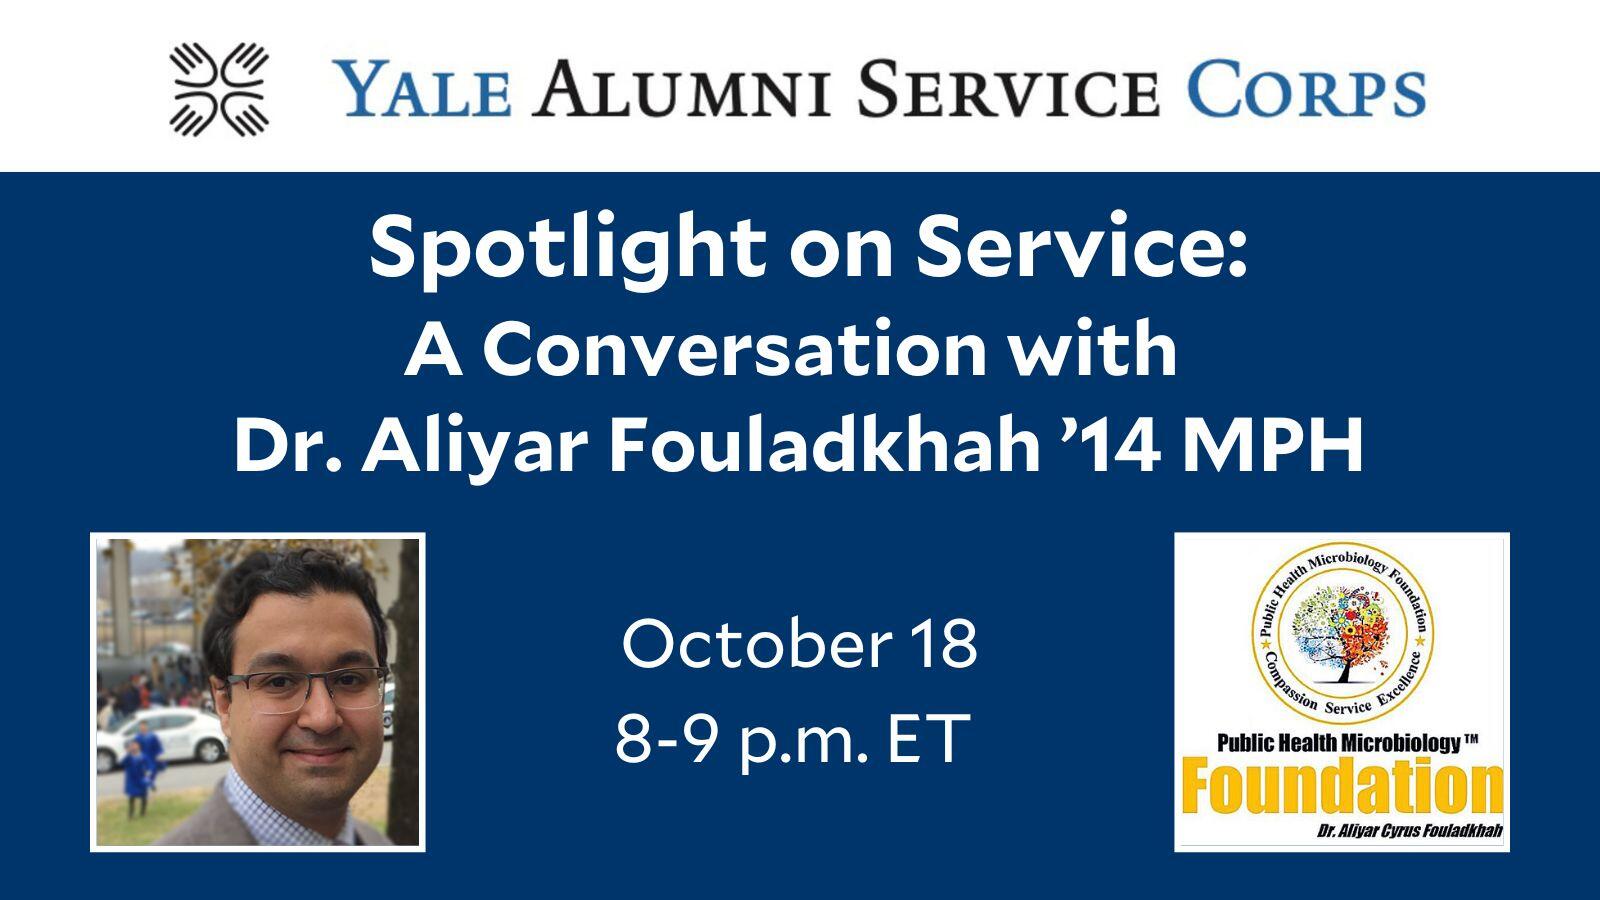 YASC Spotlight on Service: A Conversation with Dr. Aliyar Fouladkhah '14 MPH